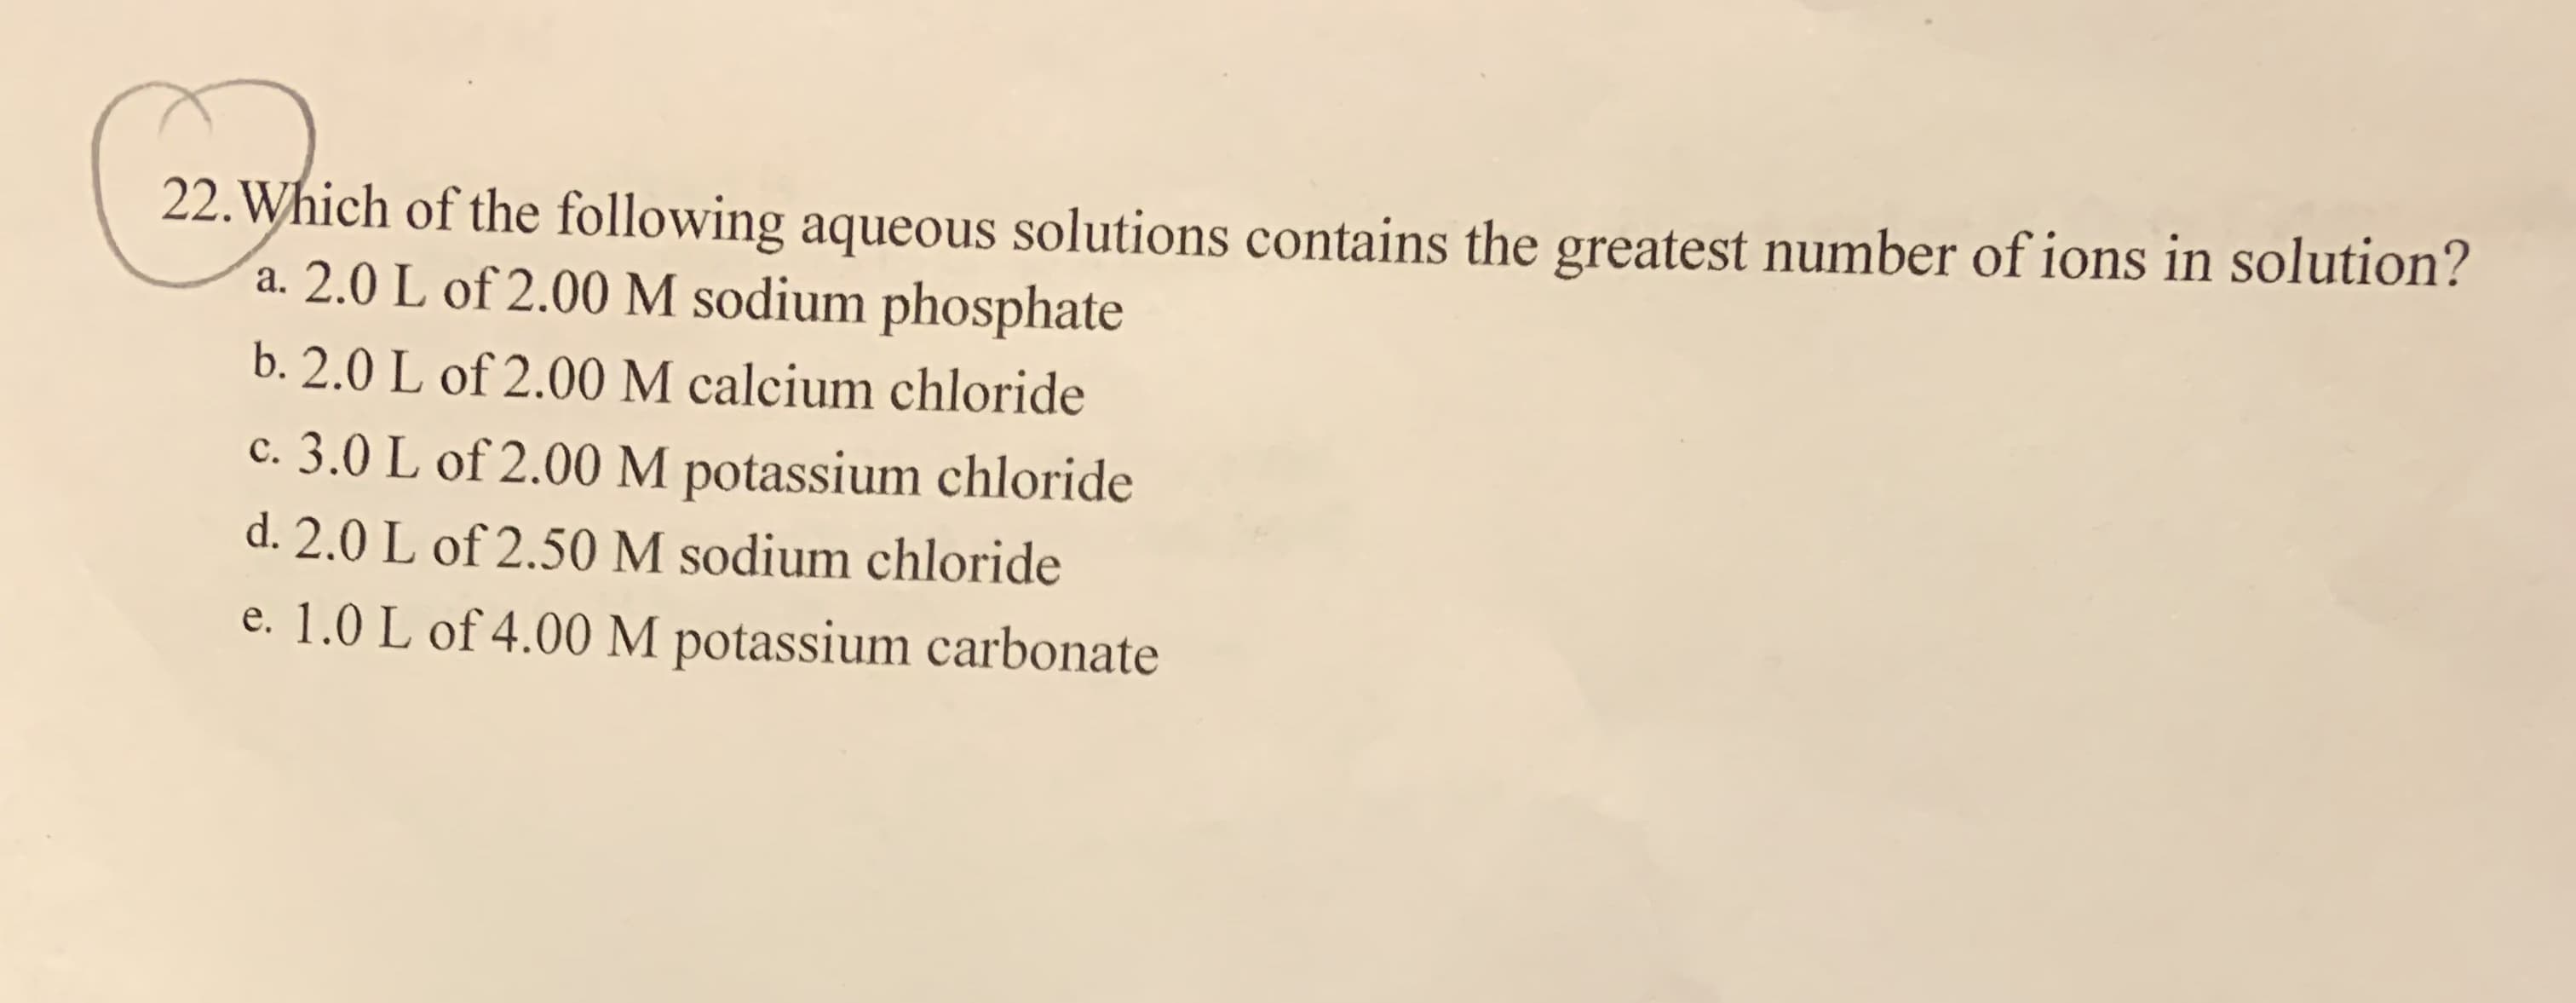 22. Which of the following aqueous solutions contains the greatest number of ions in solution?
a. 2.0 L of 2.00 M sodium phosphate
b. 2.0 L of 2.00 M calcium chloride
c. 3.0 L of 2.00 M potassium chloride
d. 2.0 L of 2.50 M sodium chloride
e. 1.0 L of 4.00 M potassium carbonate
